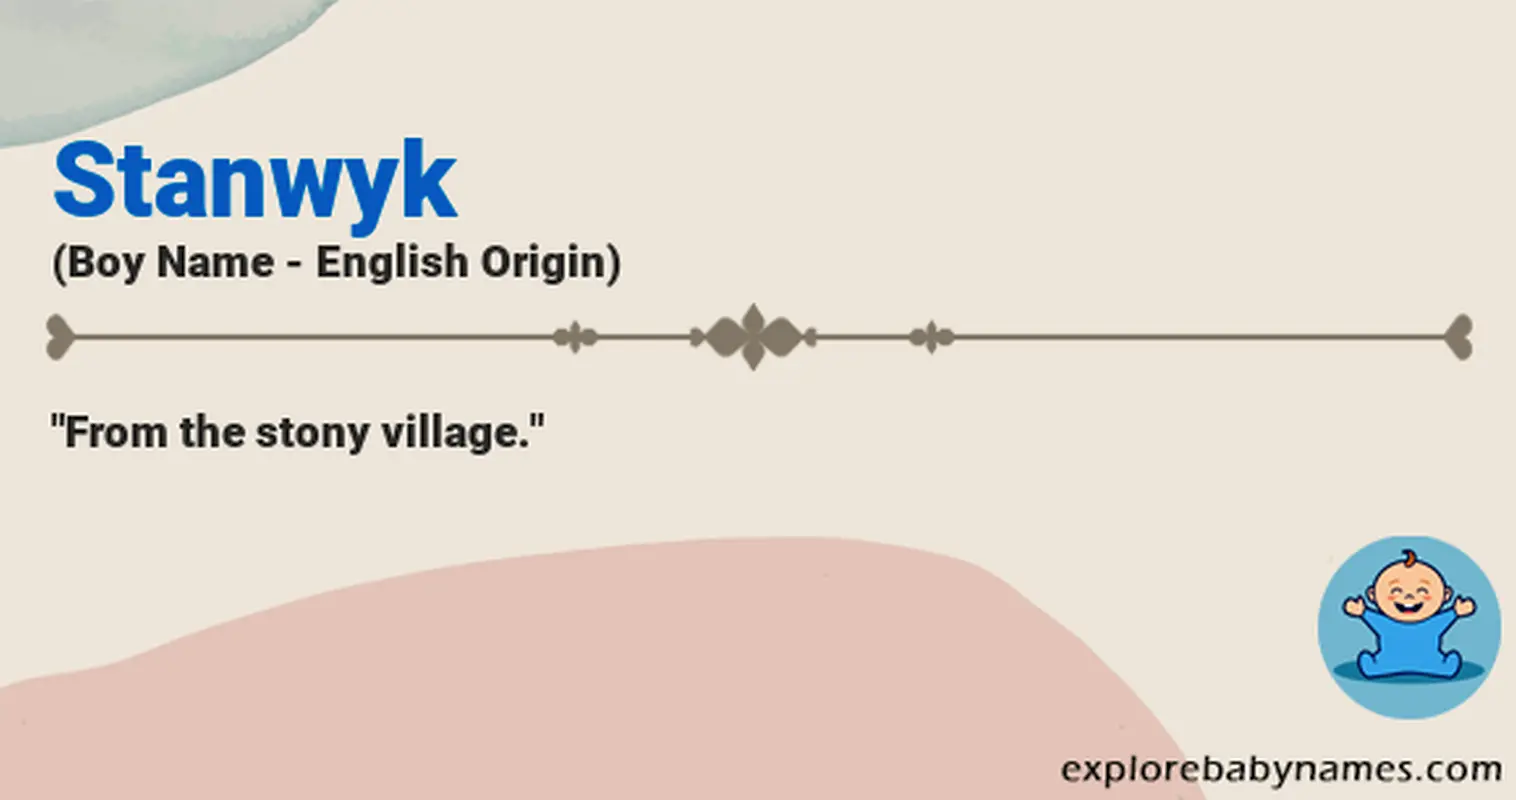 Meaning of Stanwyk